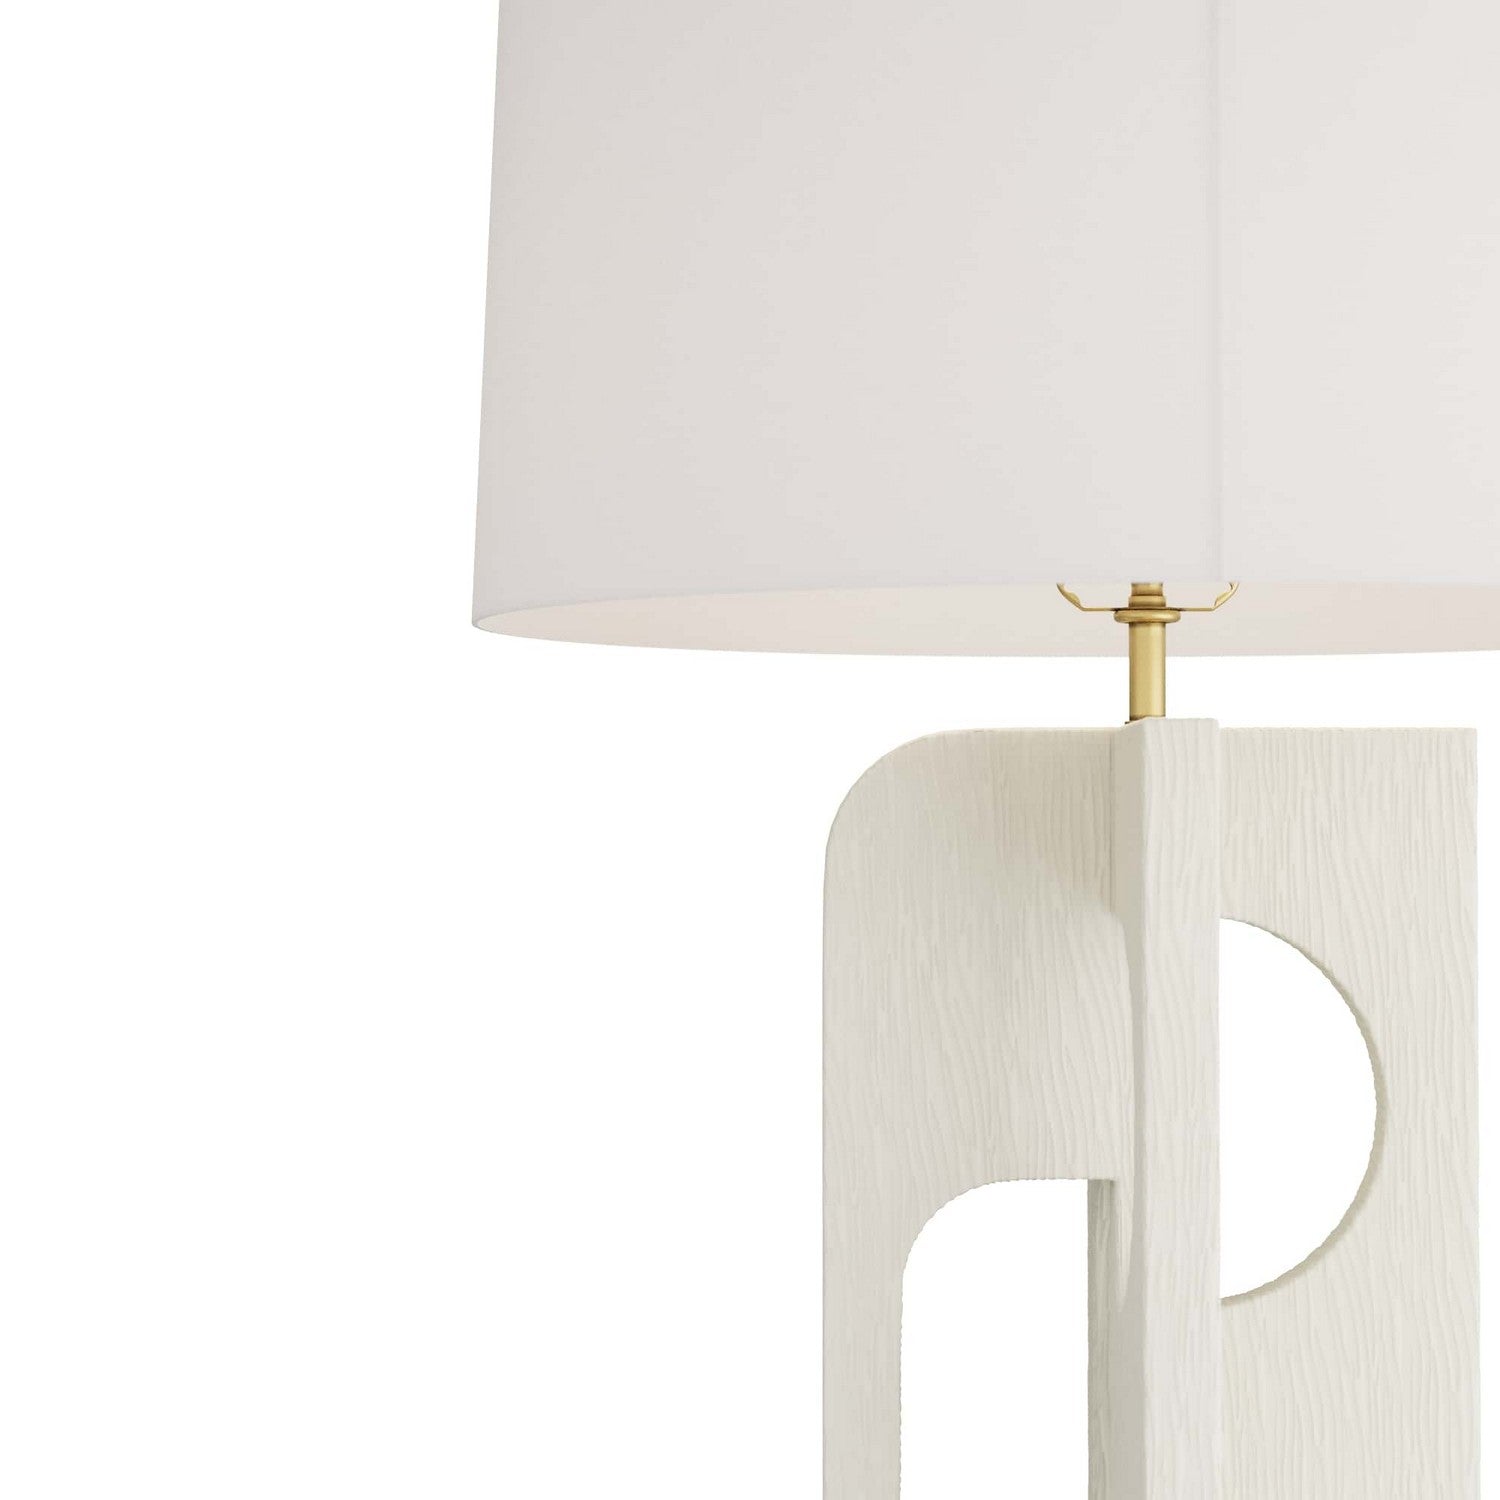 One Light Table Lamp from the Tevin collection in Matte Ivory finish